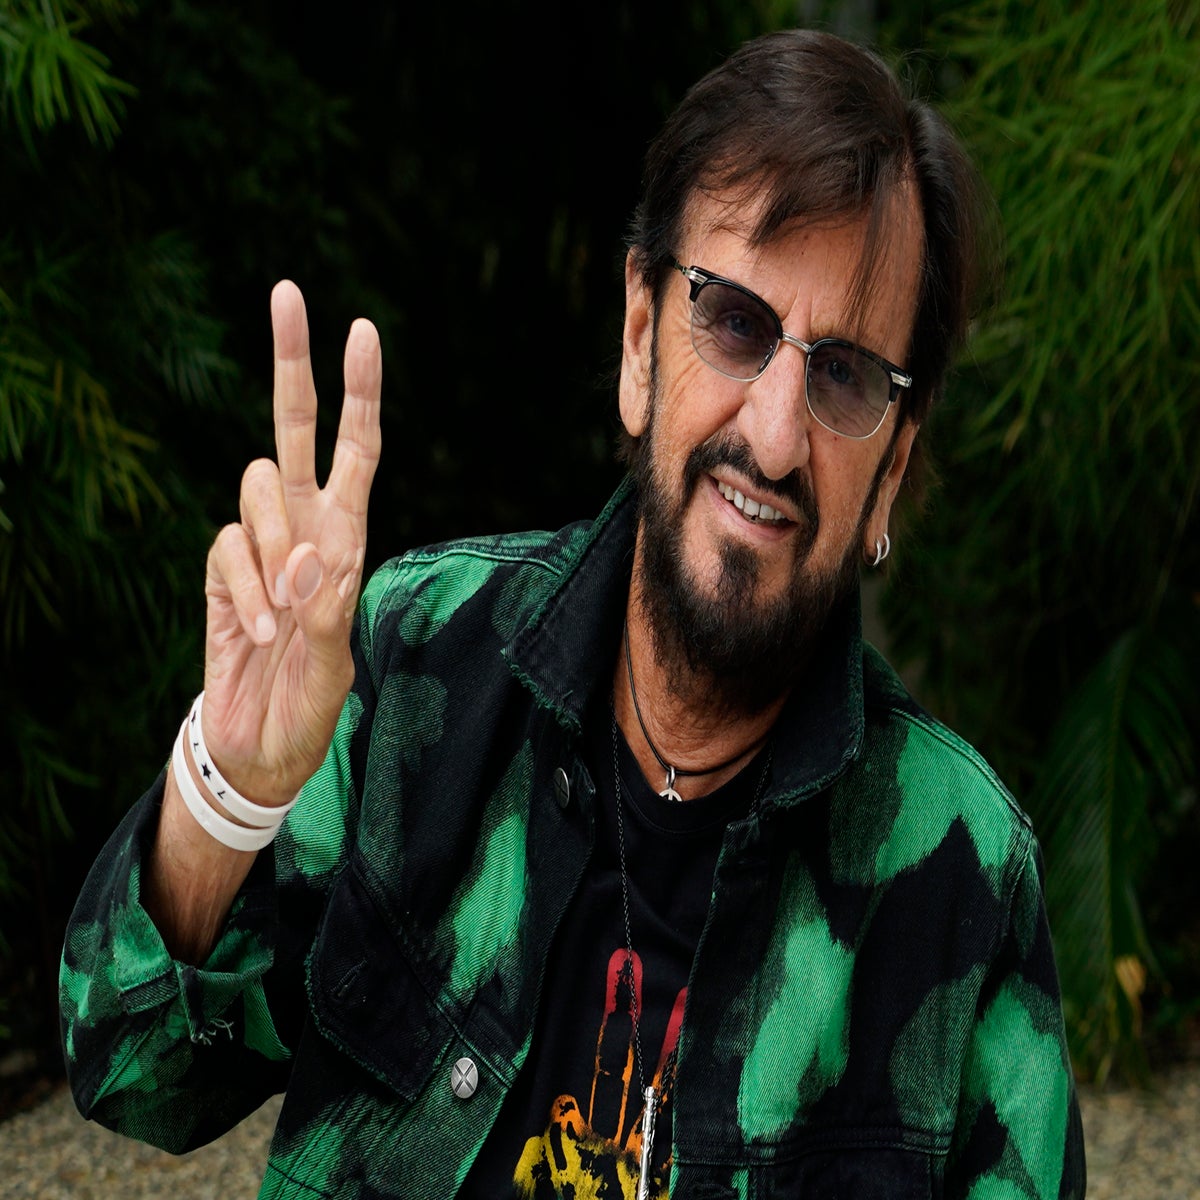 https://static.independent.co.uk/2023/09/28/14/Ringo_Starr_Portrait_Session_02421.jpg?width=1200&height=1200&fit=crop